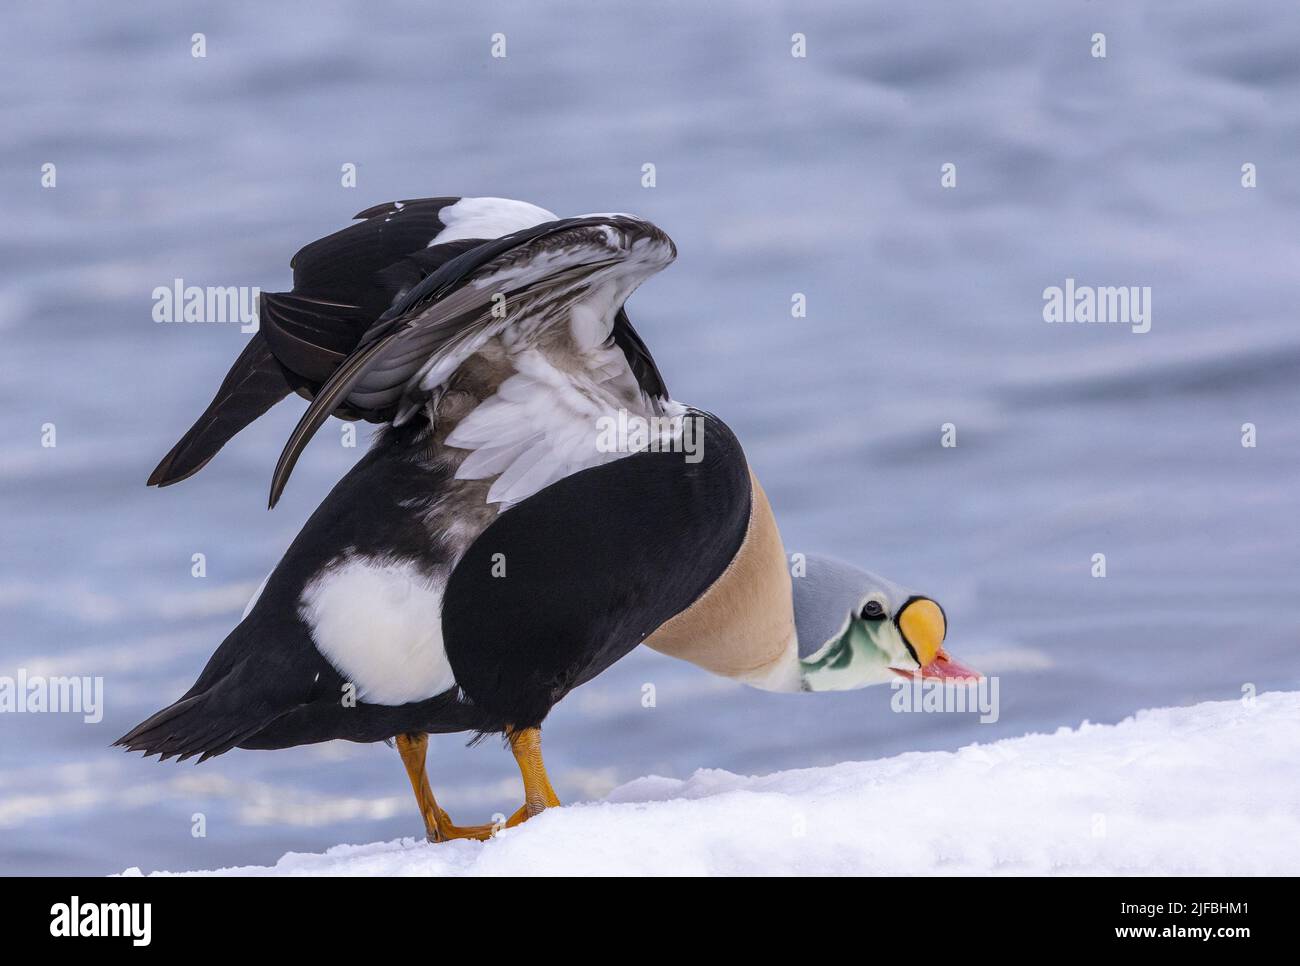 Norway, Båtsfjord, Harbour of Båtsfjord, King eider (Somateria spectabilis), male resting on a piece of snow Stock Photo